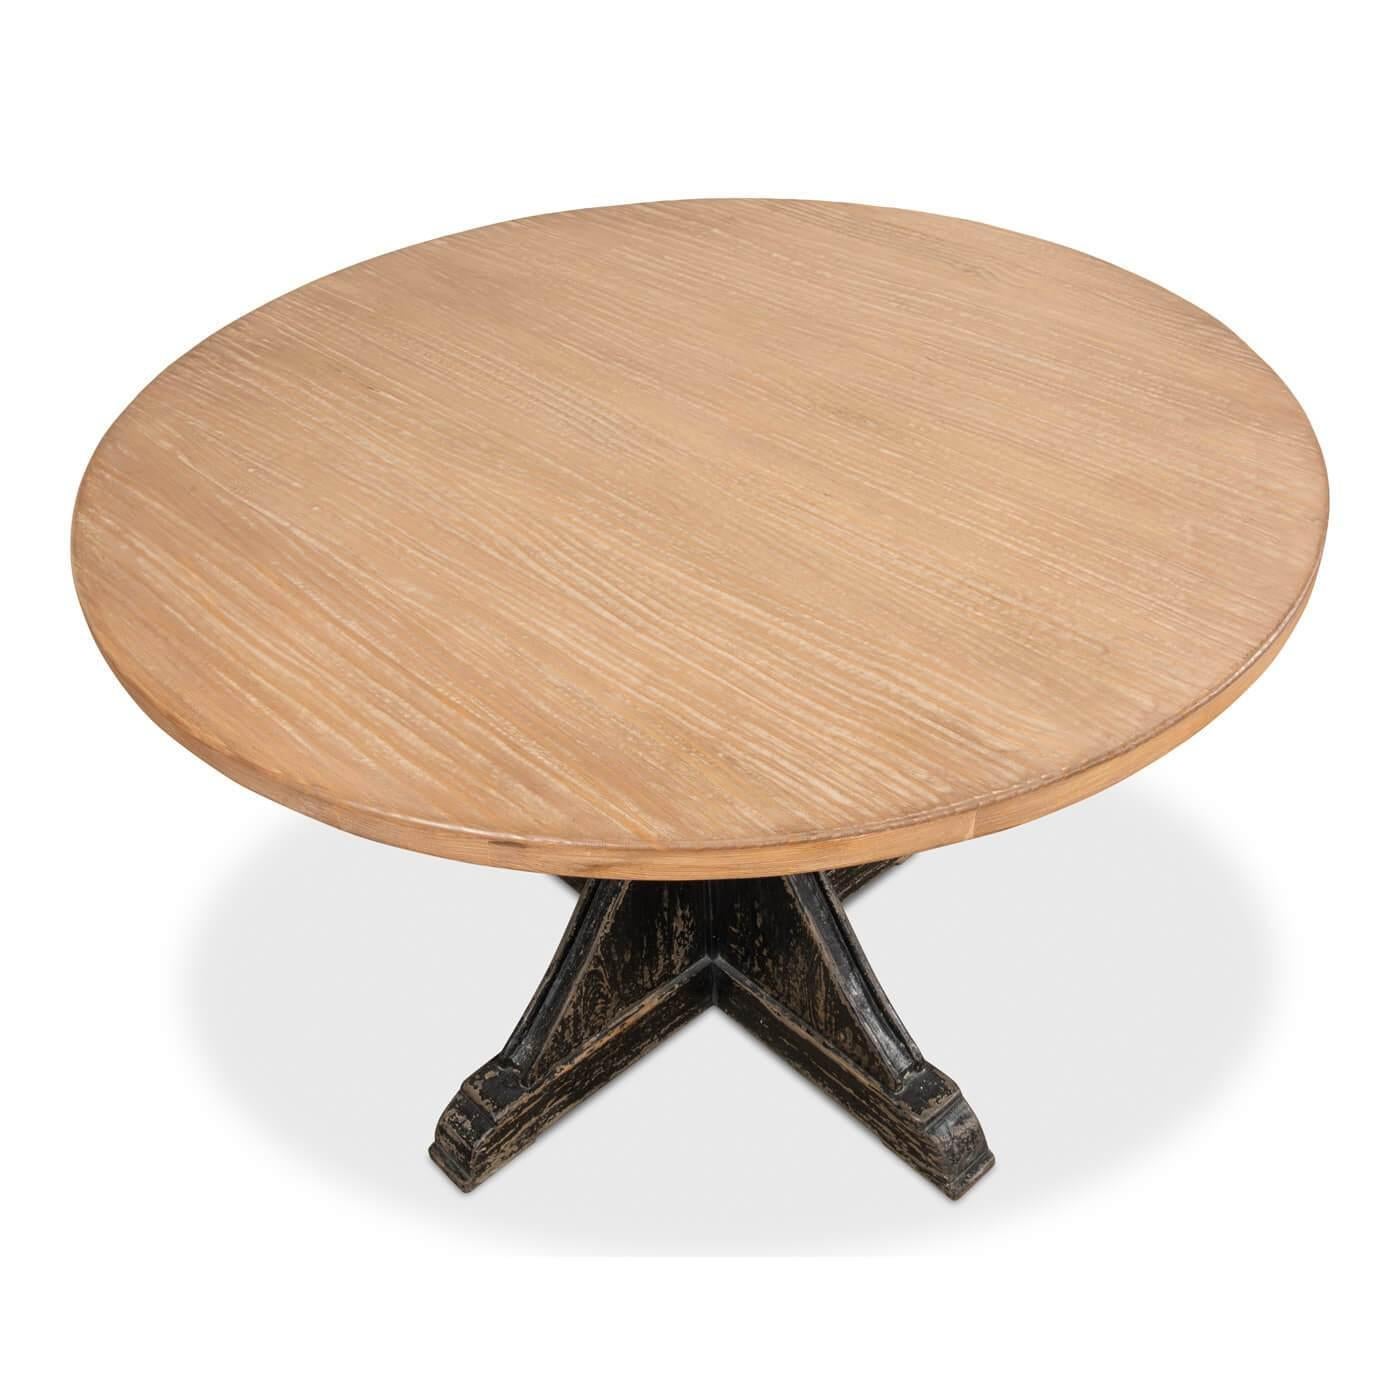 Modern Industrial round dining table with reclaimed natural pine top with black distressed base. 

Dimensions: 42